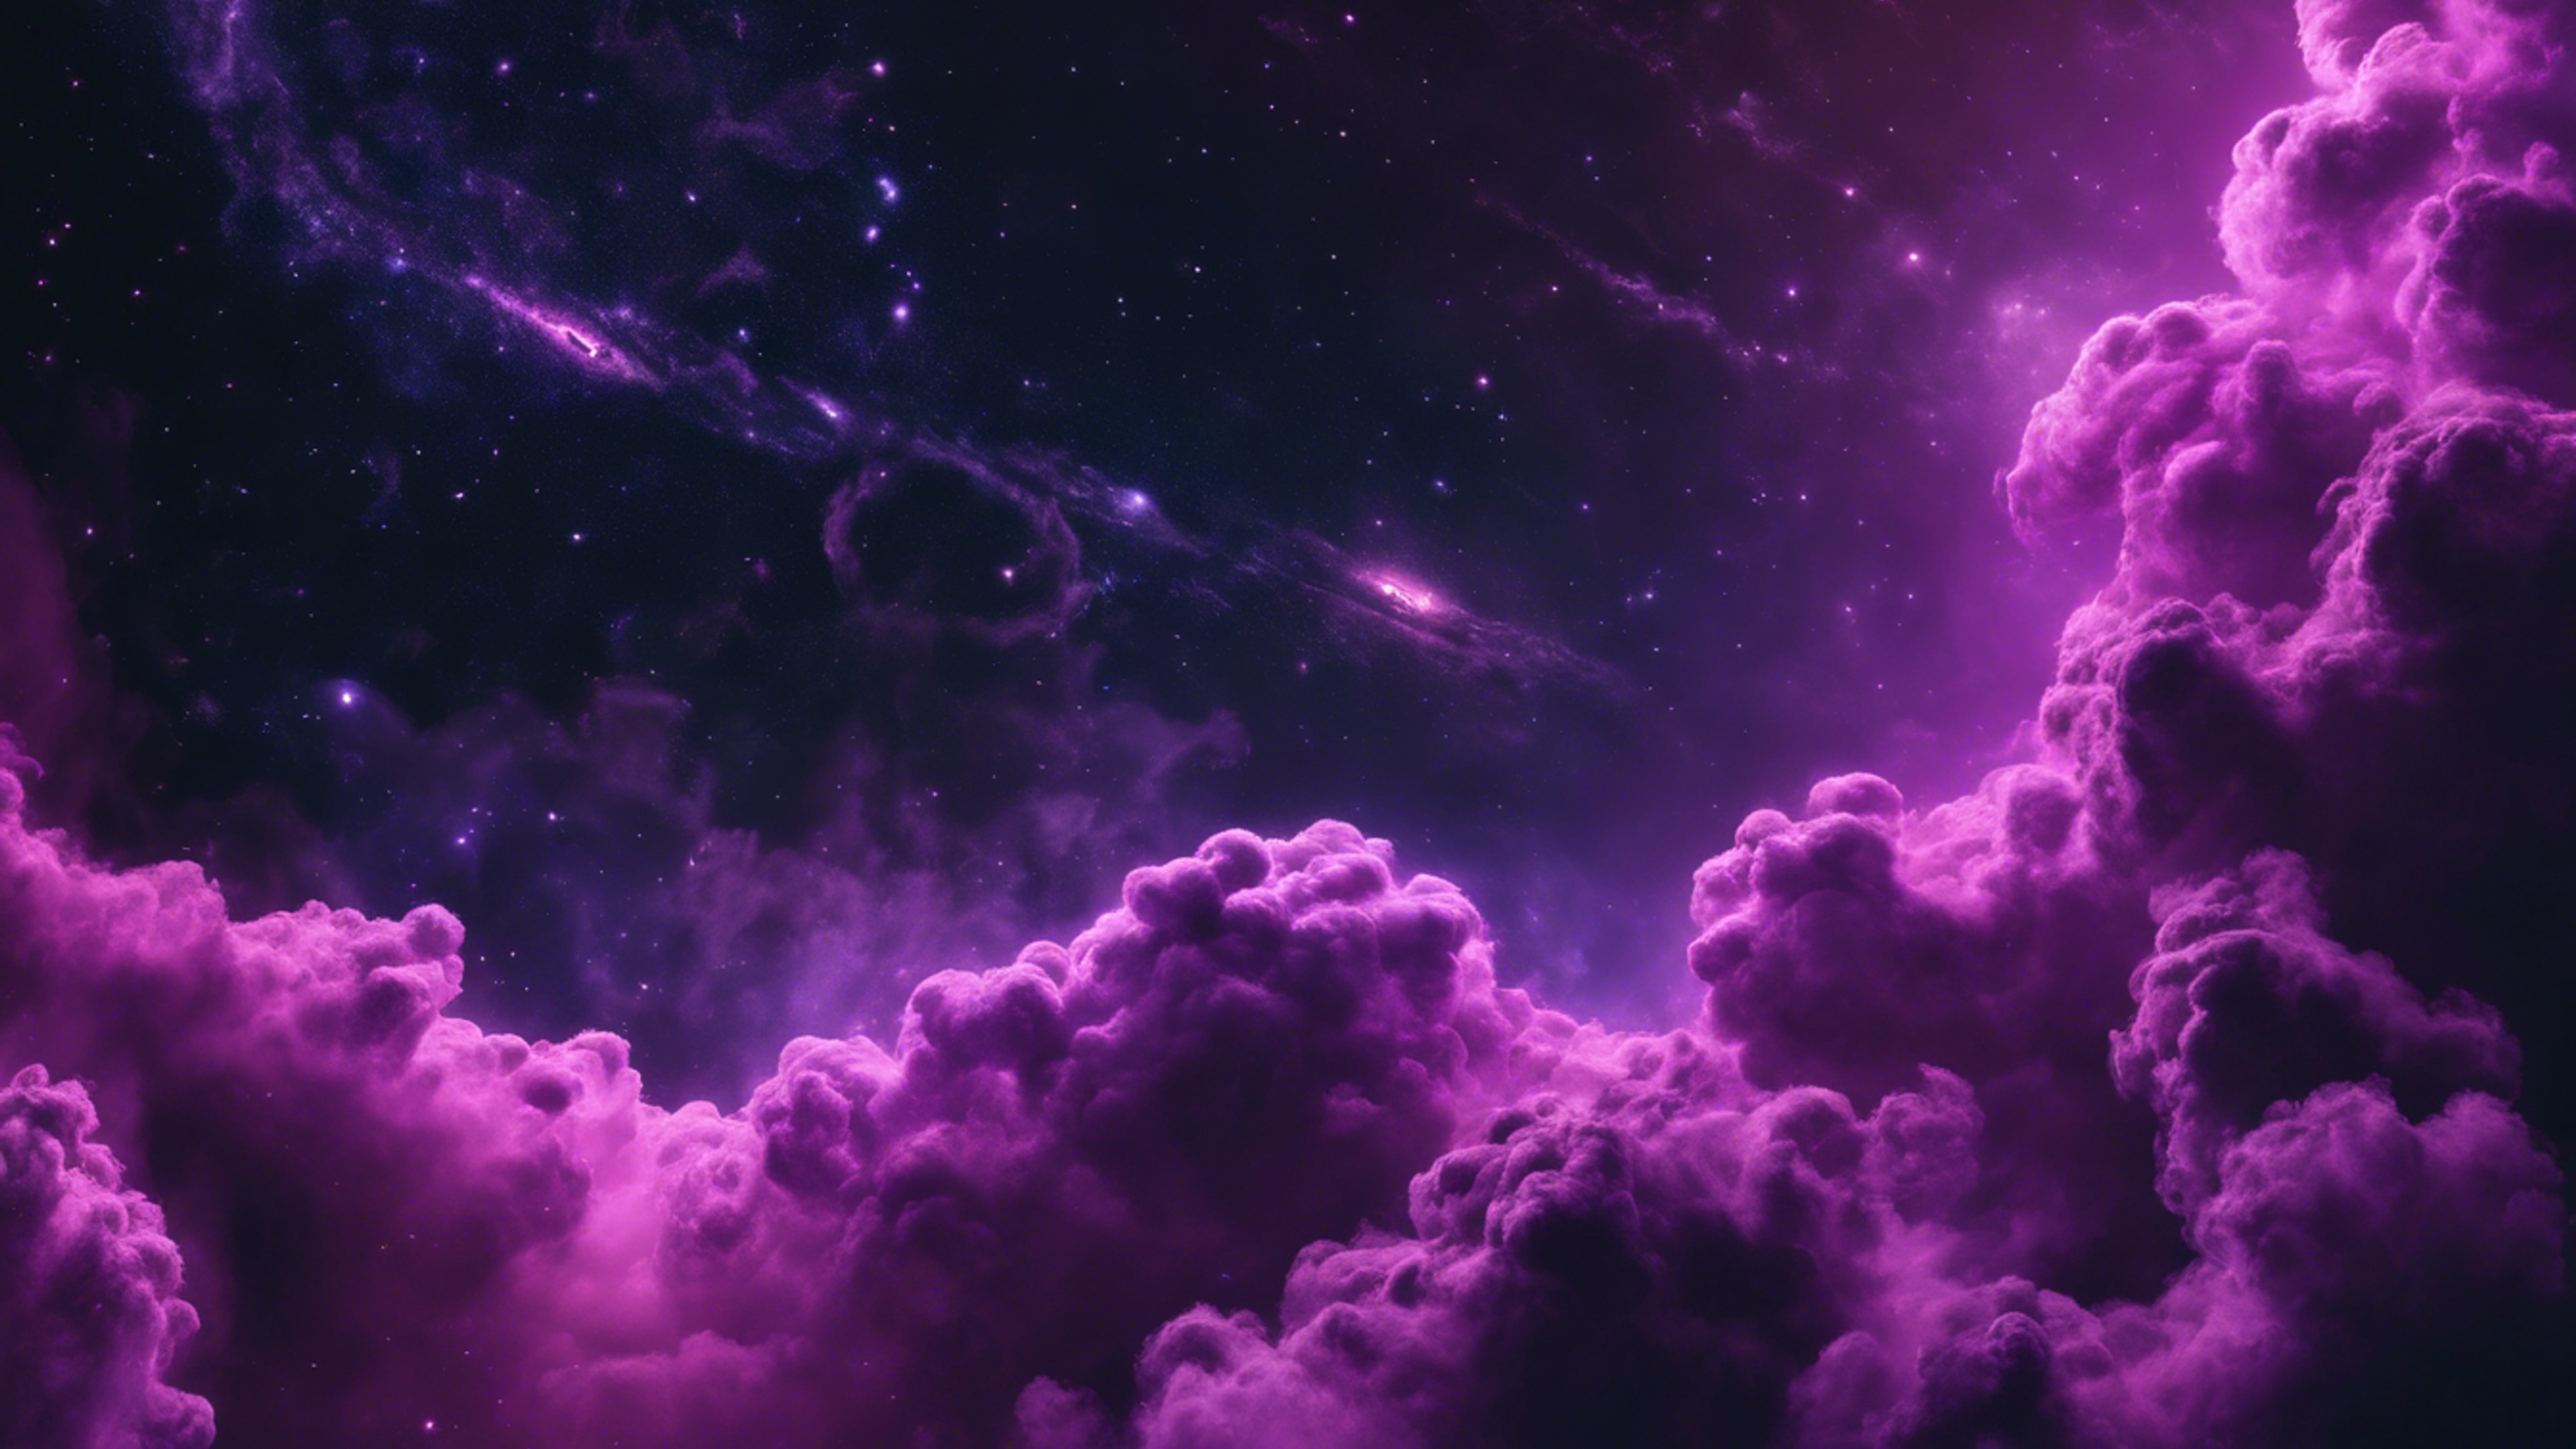 A galaxy scene with swirling neon purple clouds against star-spangled, cool black background.壁紙[557a8cf107504dbea099]